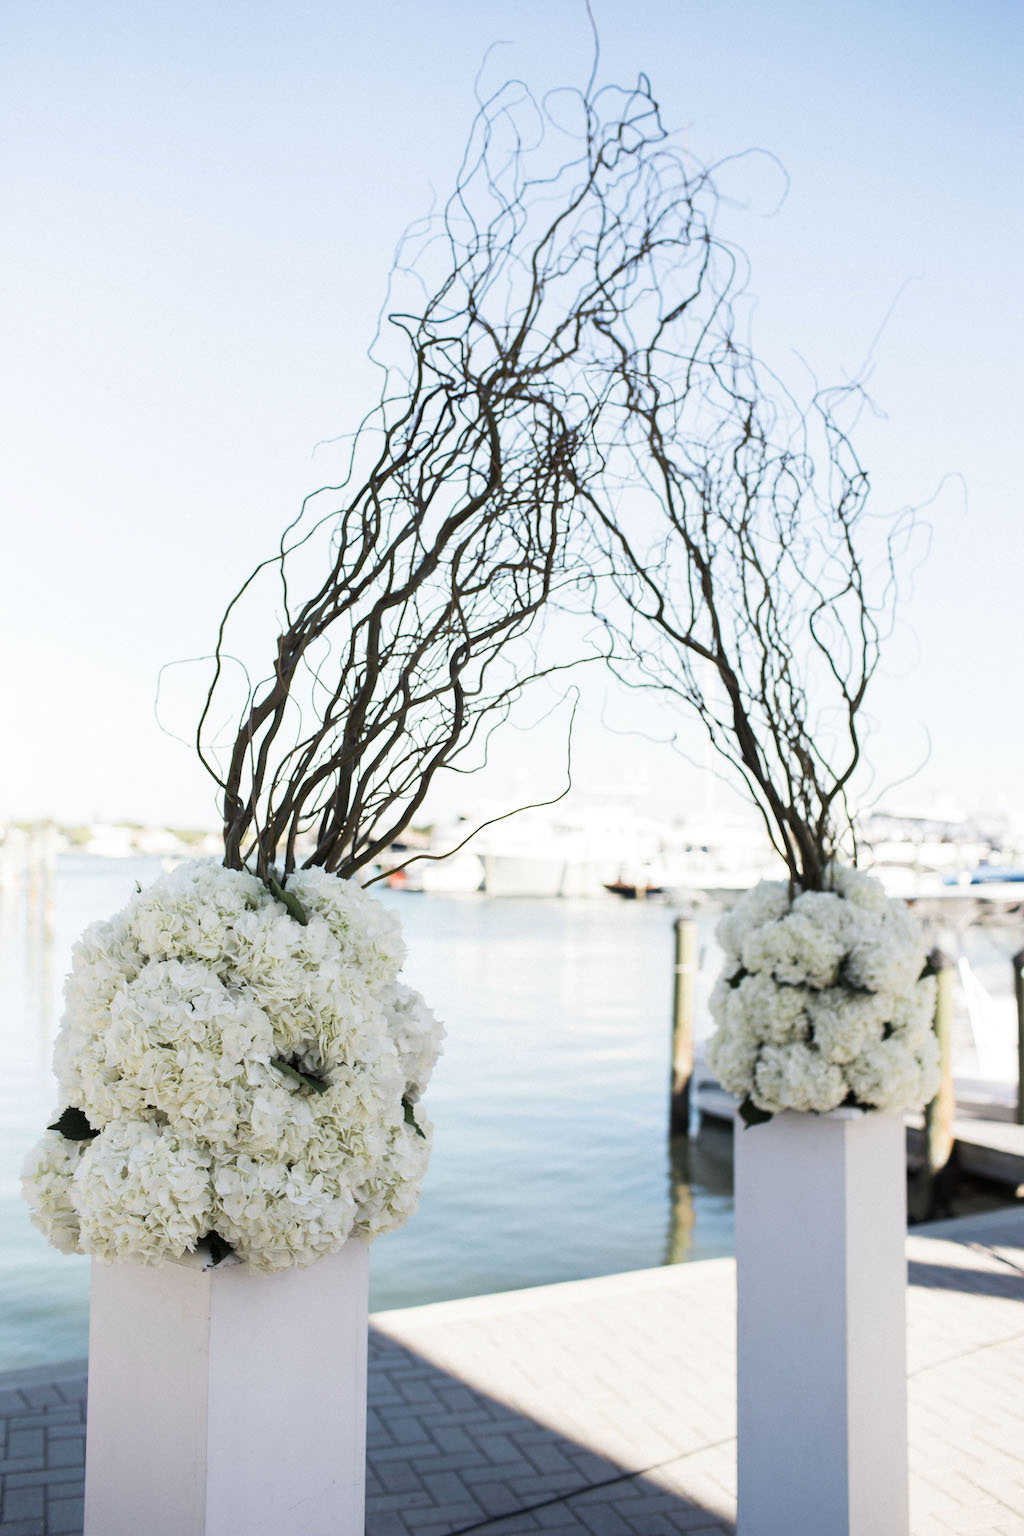 Waterfront Wedding Ceremony Decor with White Hydrangeas on Pedestals with Natural Branches | Sarasota Wedding Planner NK Productions